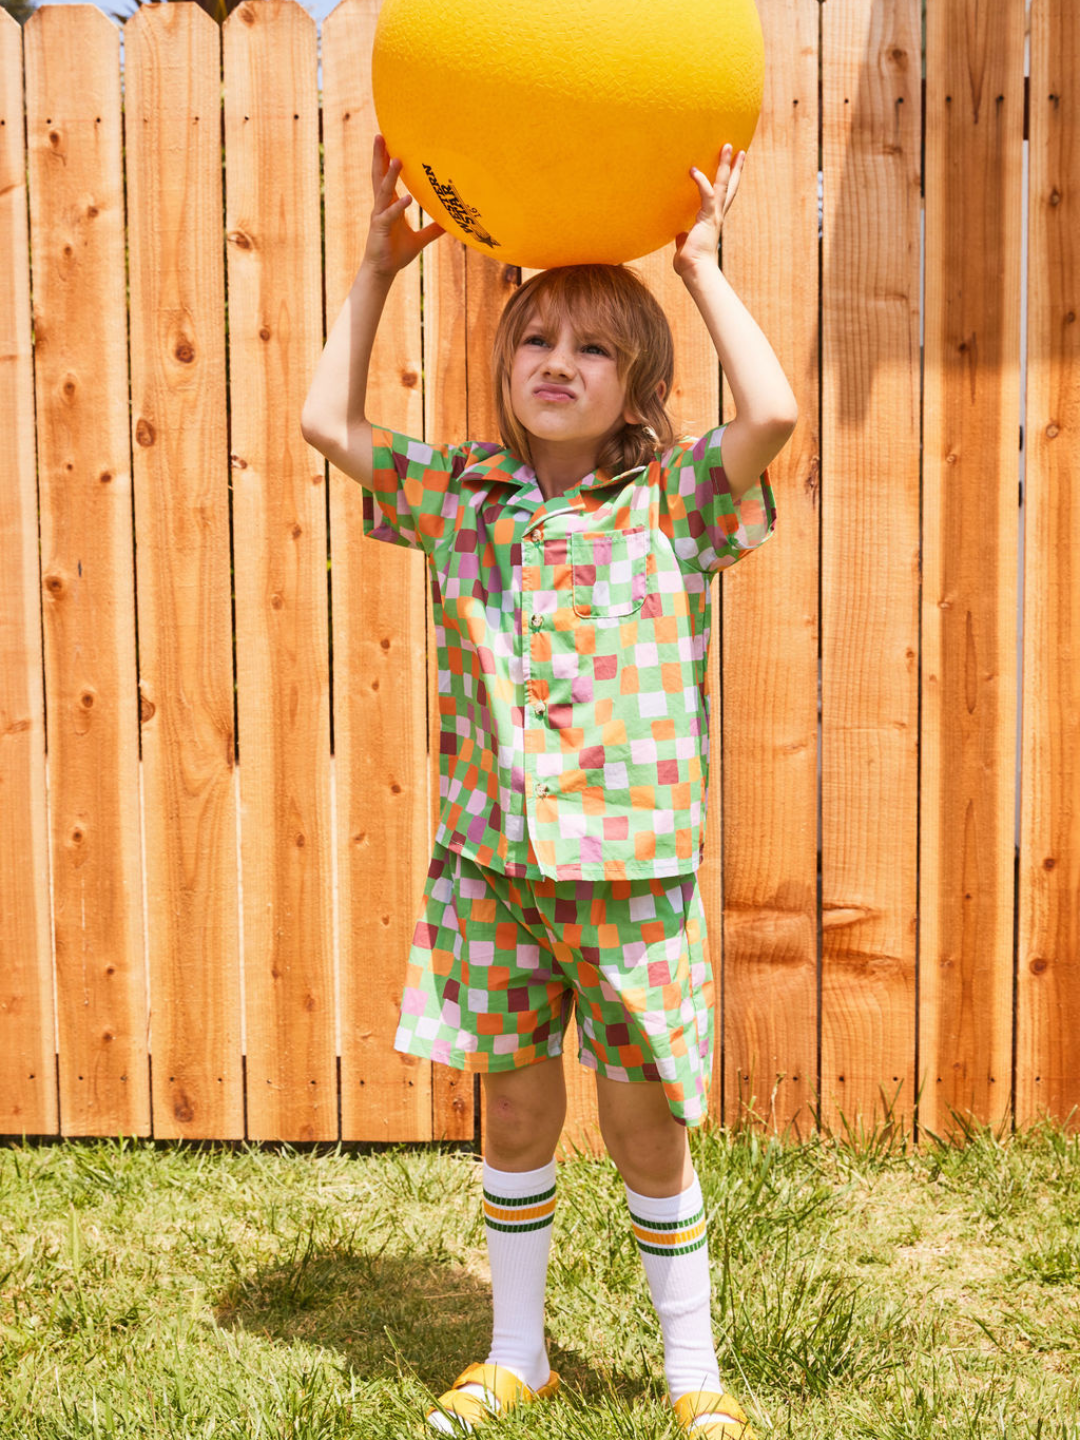 A child balancing a ball on his head, wearing a kids' shirt and shorts set in a pattern of purple, pink, gold and orange squares on a green background